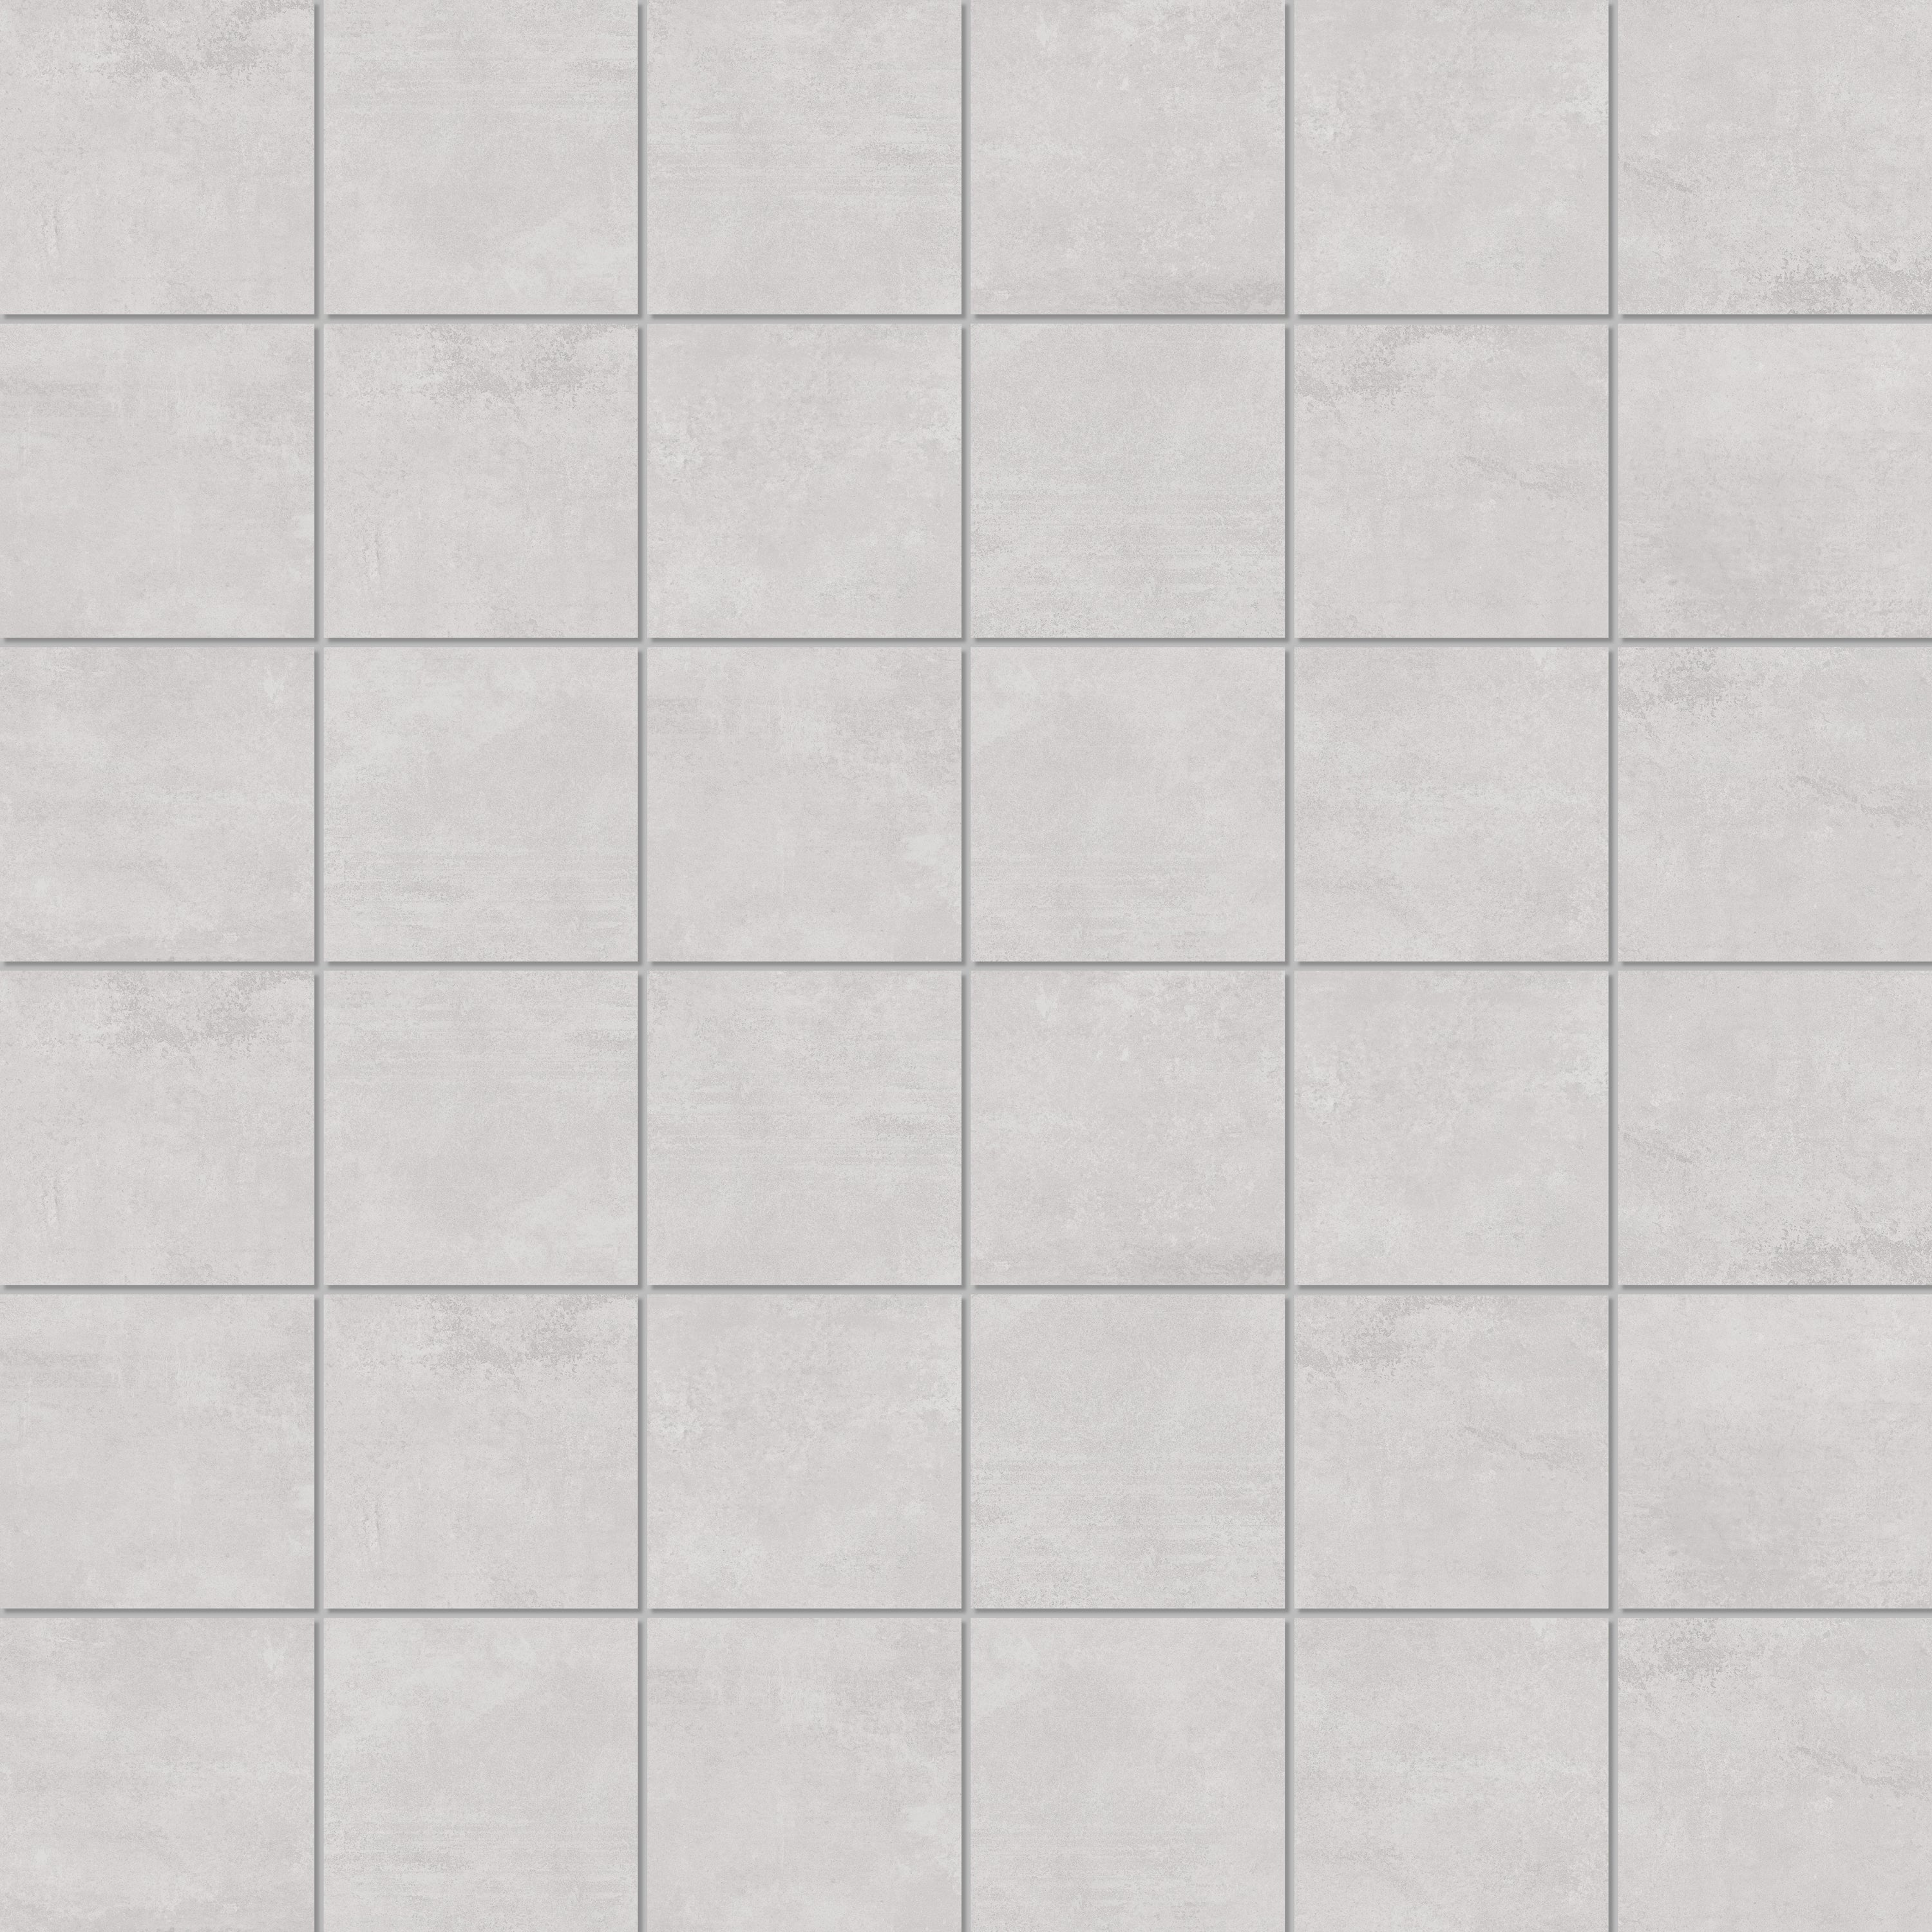 landmark contract portland grey straight stack 2x2 mosaic 12x12x8mm matte pressed porcelain tile distributed by surface group international